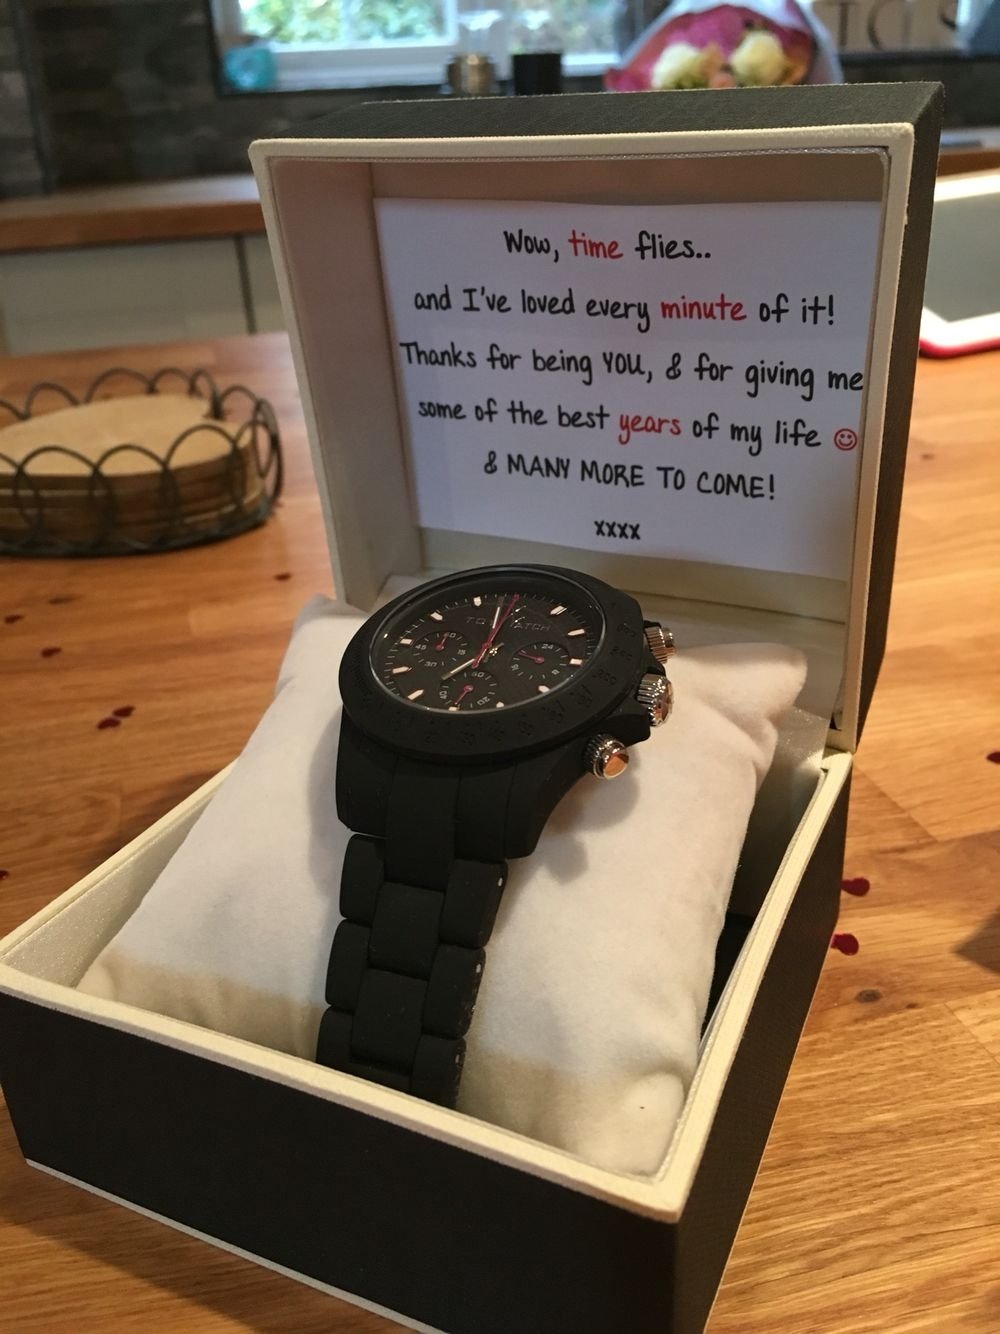 10 Stylish 3 Year Anniversary Gift Ideas For Boyfriend 3 year anniversary gift for my boyfriend of 3 years watch and card 2 2022